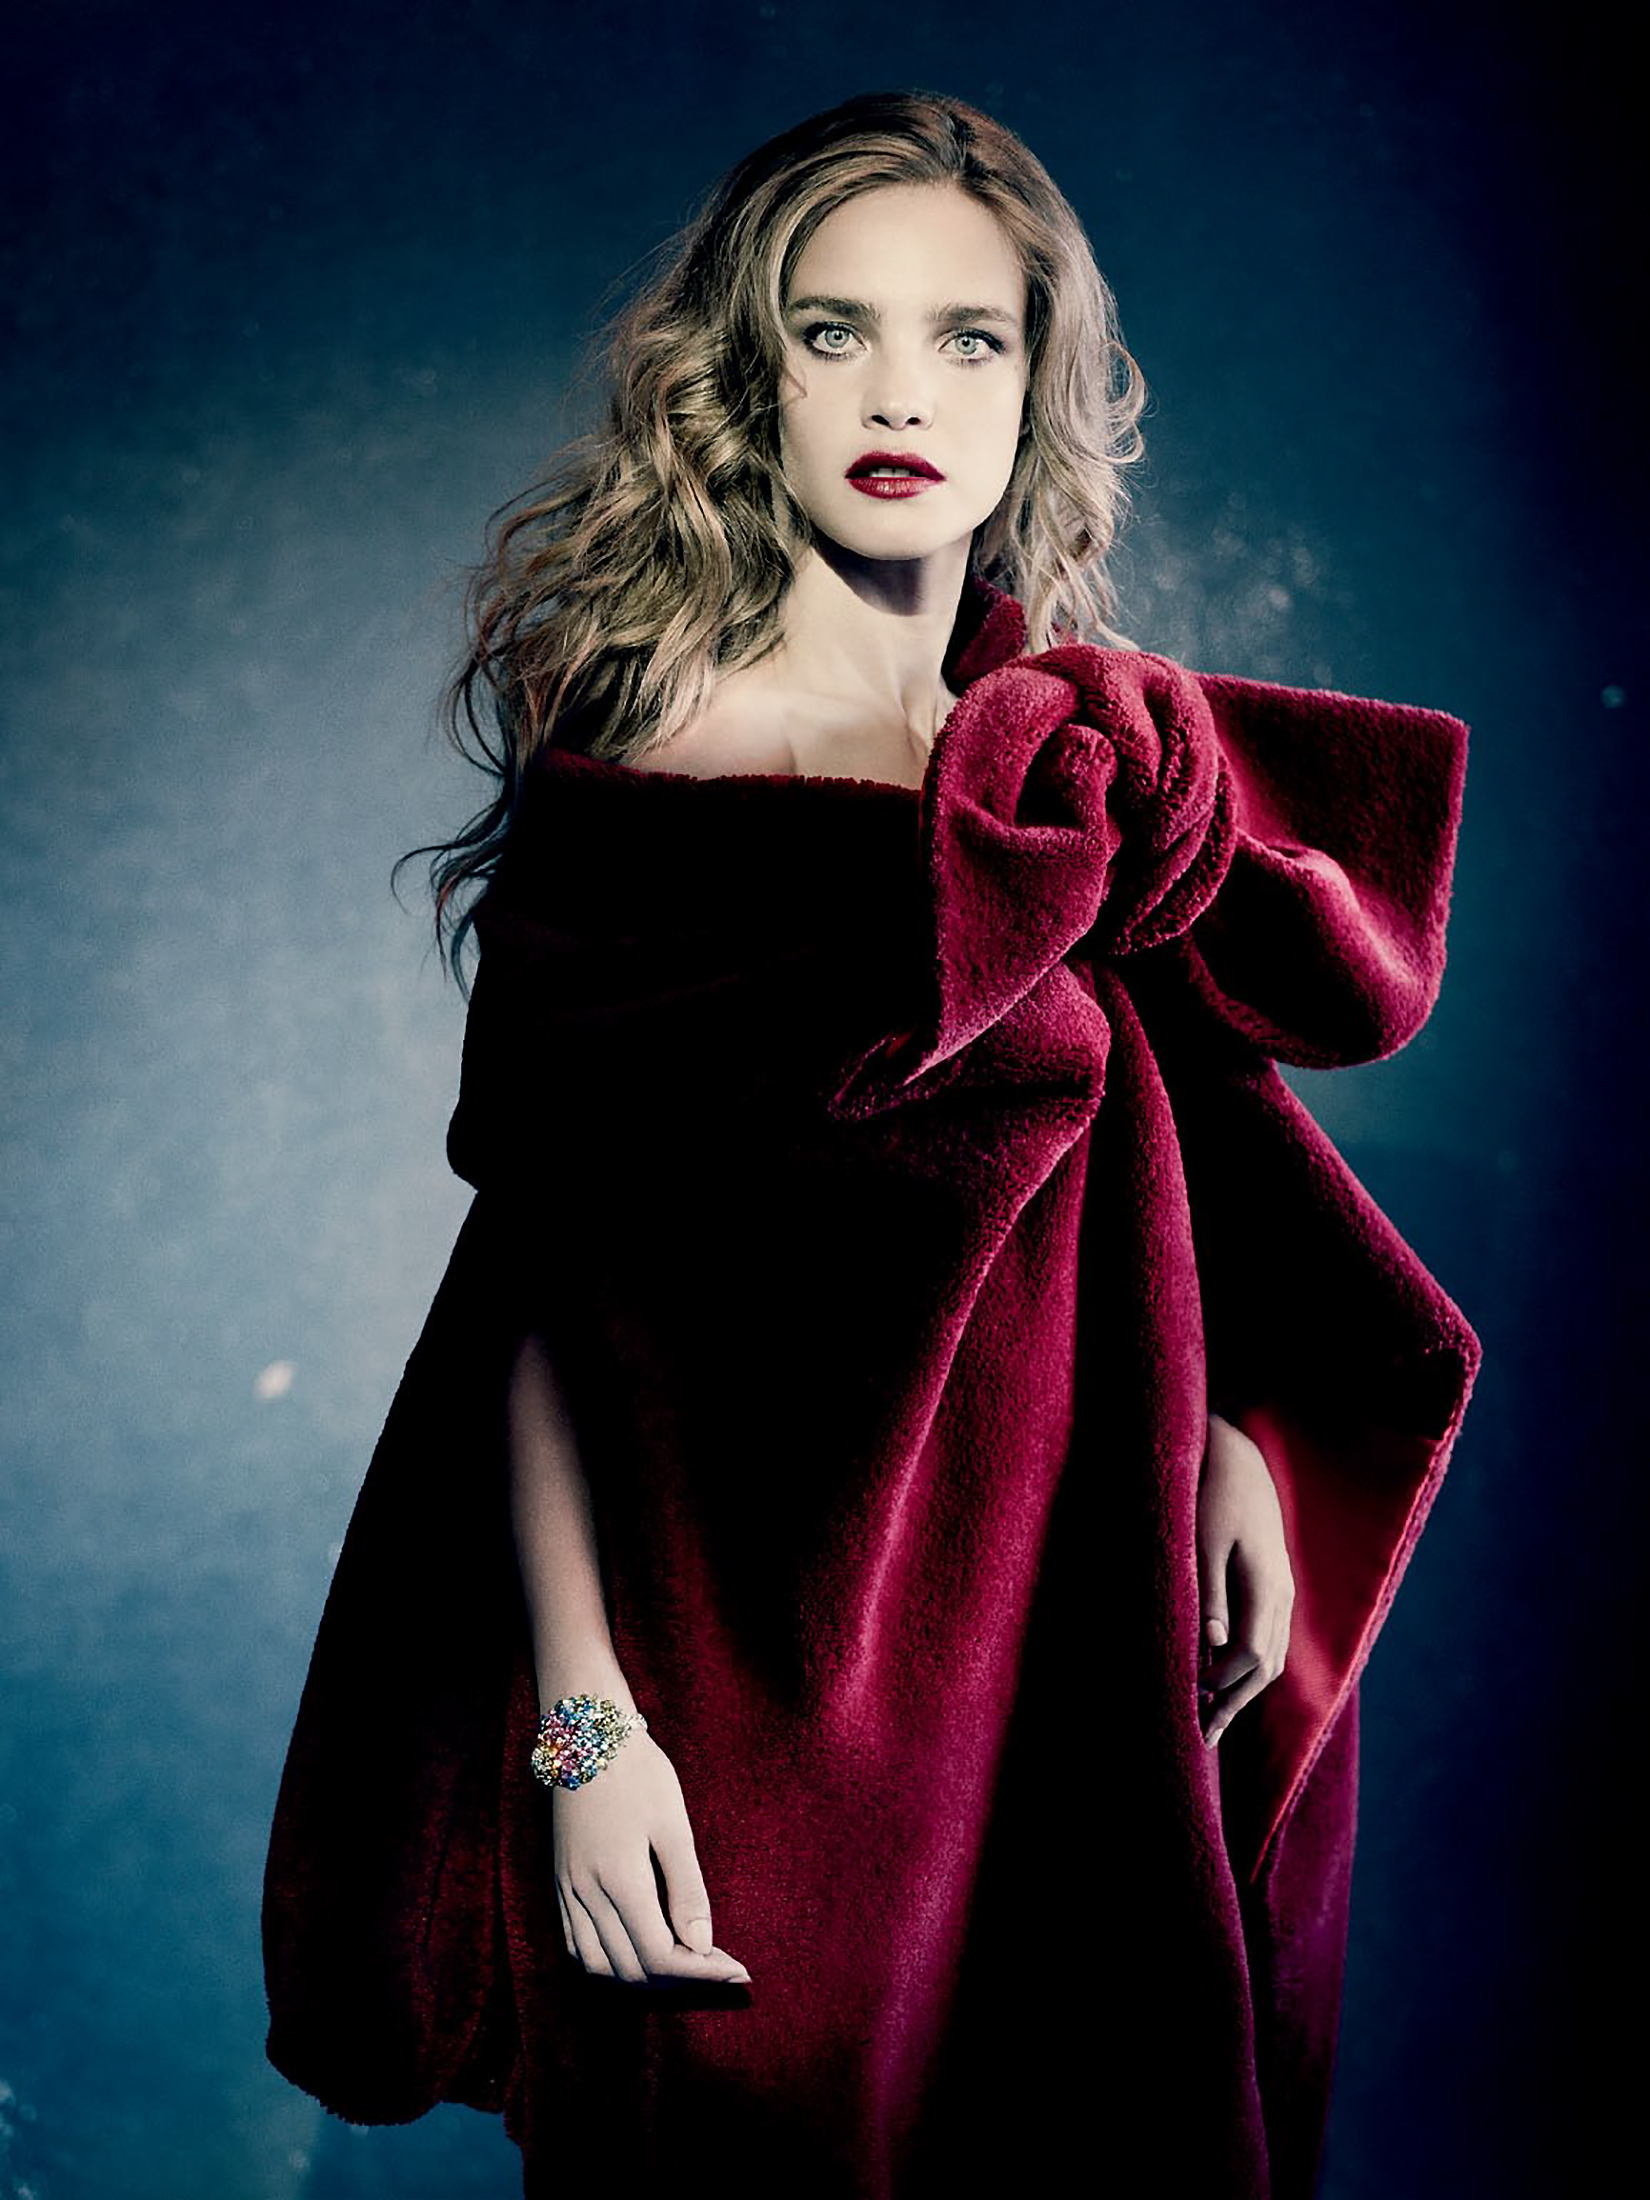 natalia-vodianova-by-paolo-roversi-for-vogue-russia-december-2014-6.jpg